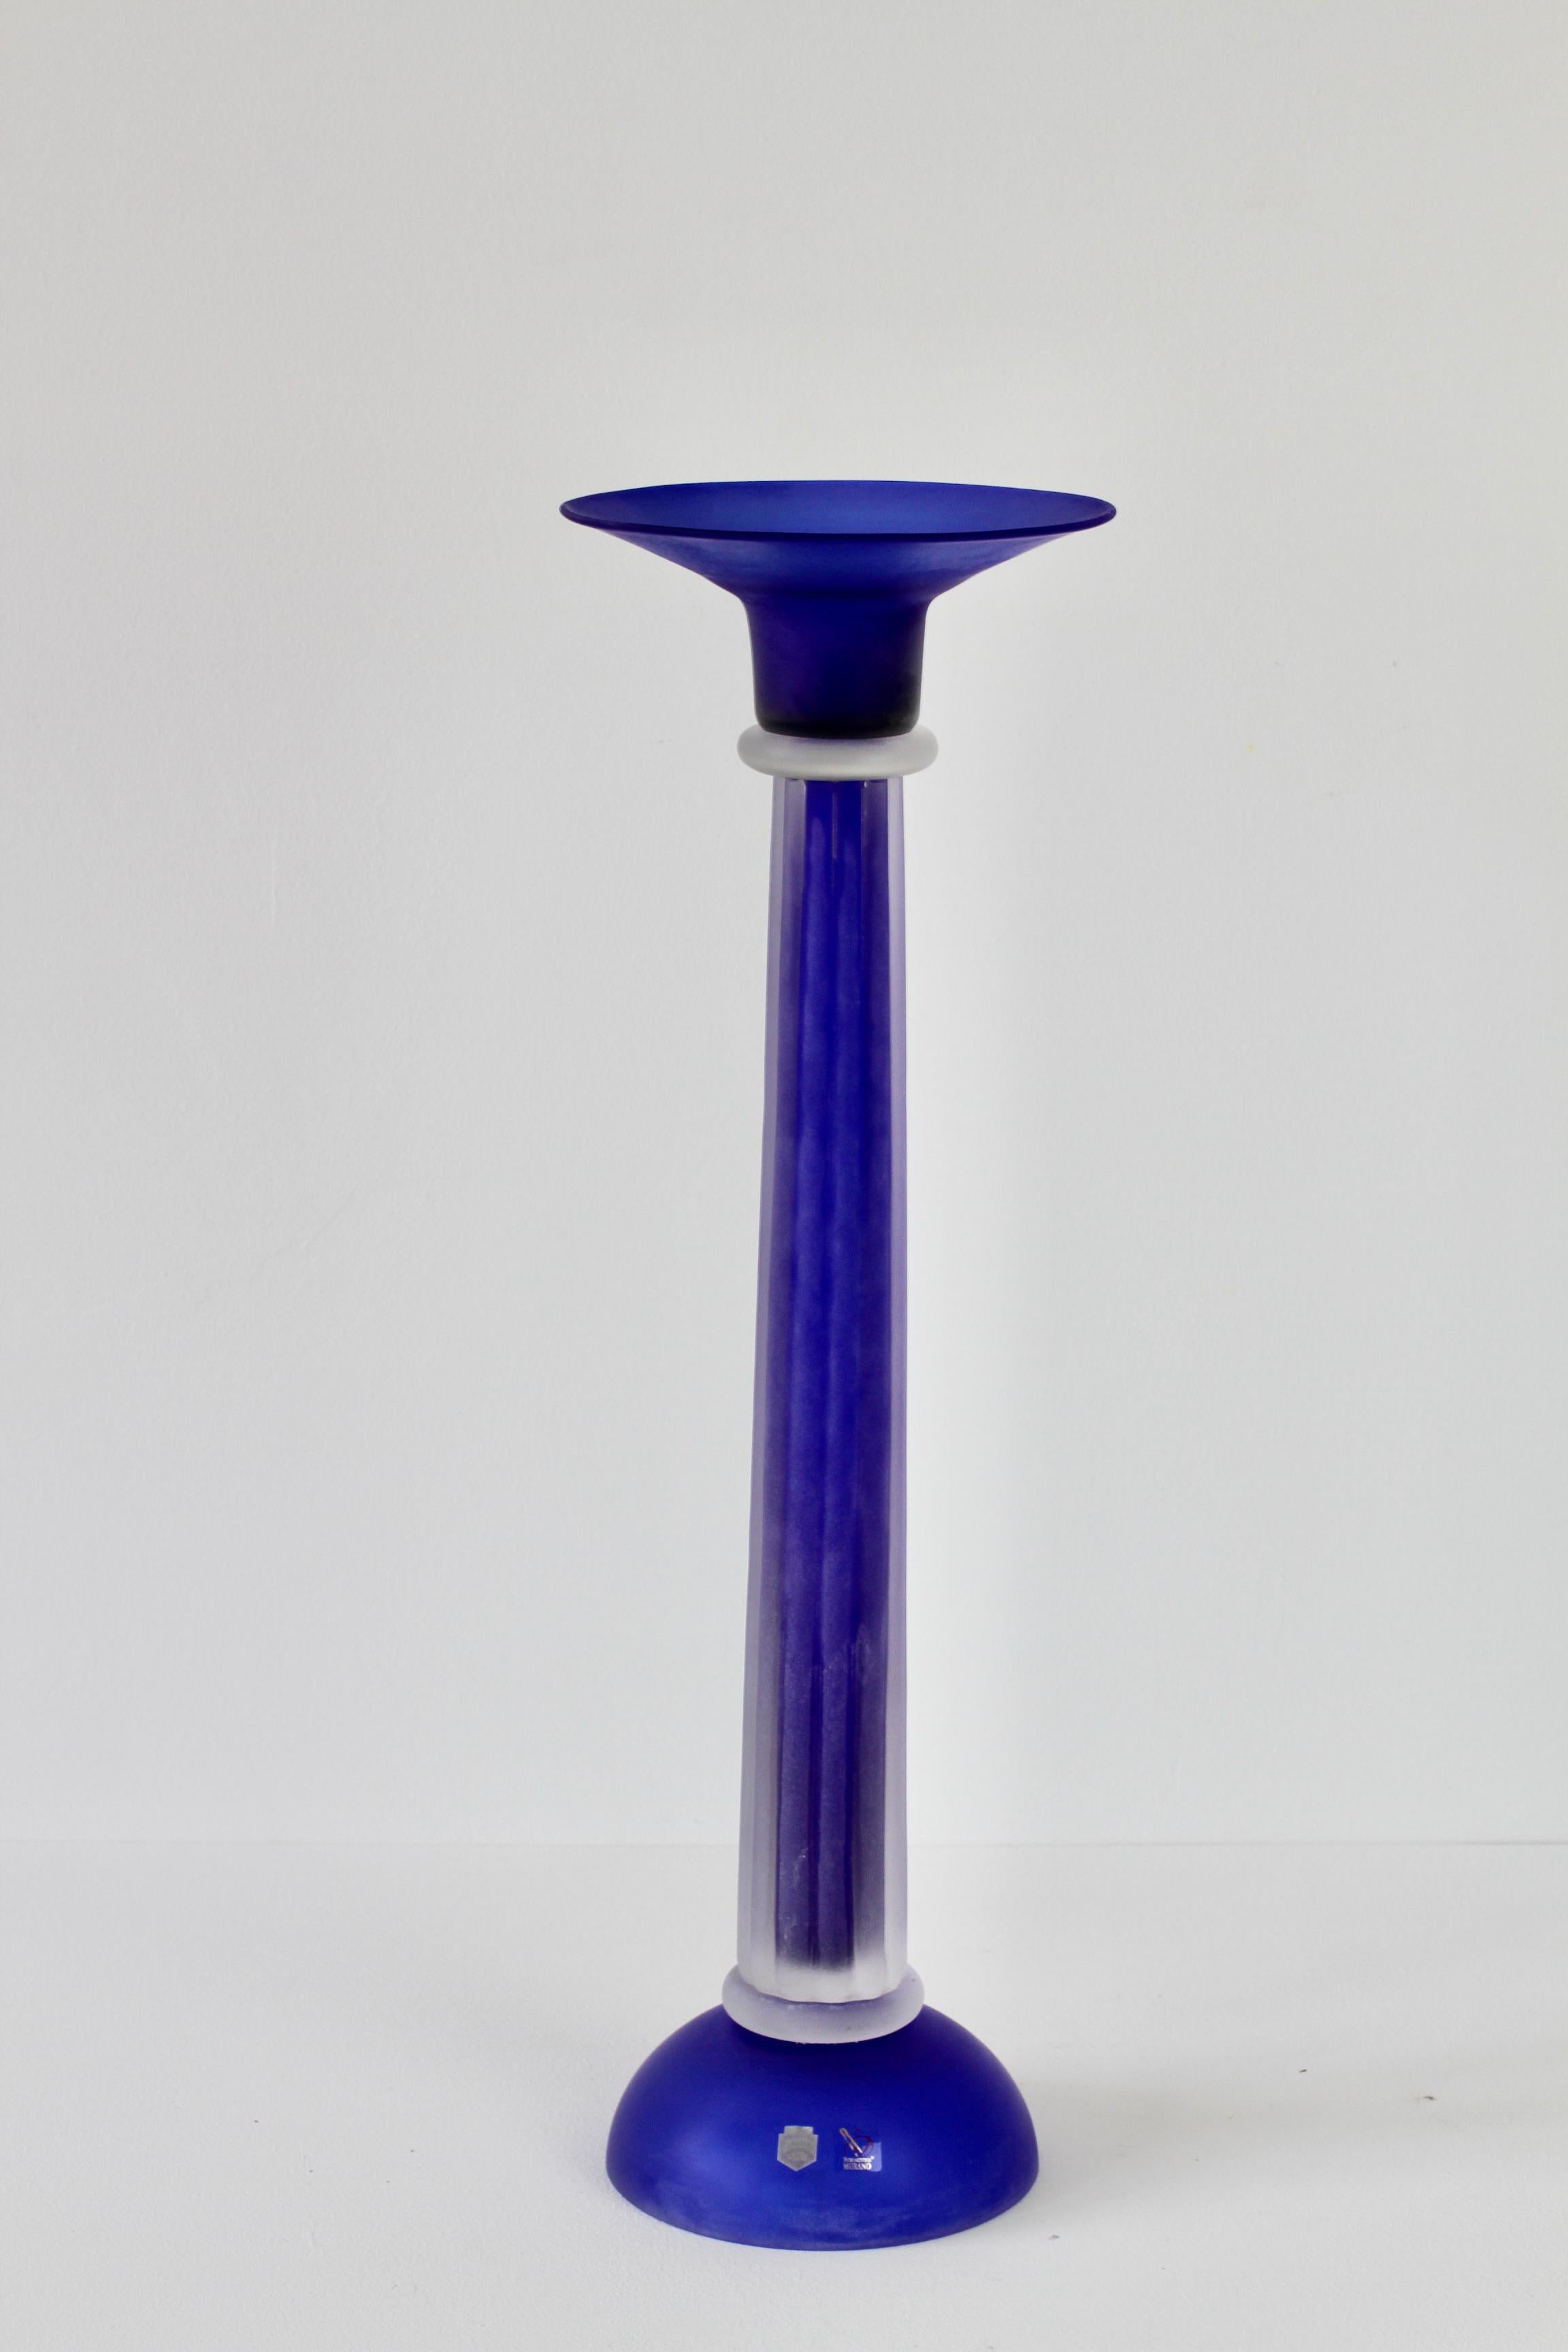 Monumental, tall and huge cobalt blue colored (coloured) Italian Murano glass candlestick holder by Cenedese. Beautiful craftsmanship and stunning bright cobalt blue color with a rippled stem encased in clear glass which appears to either have the